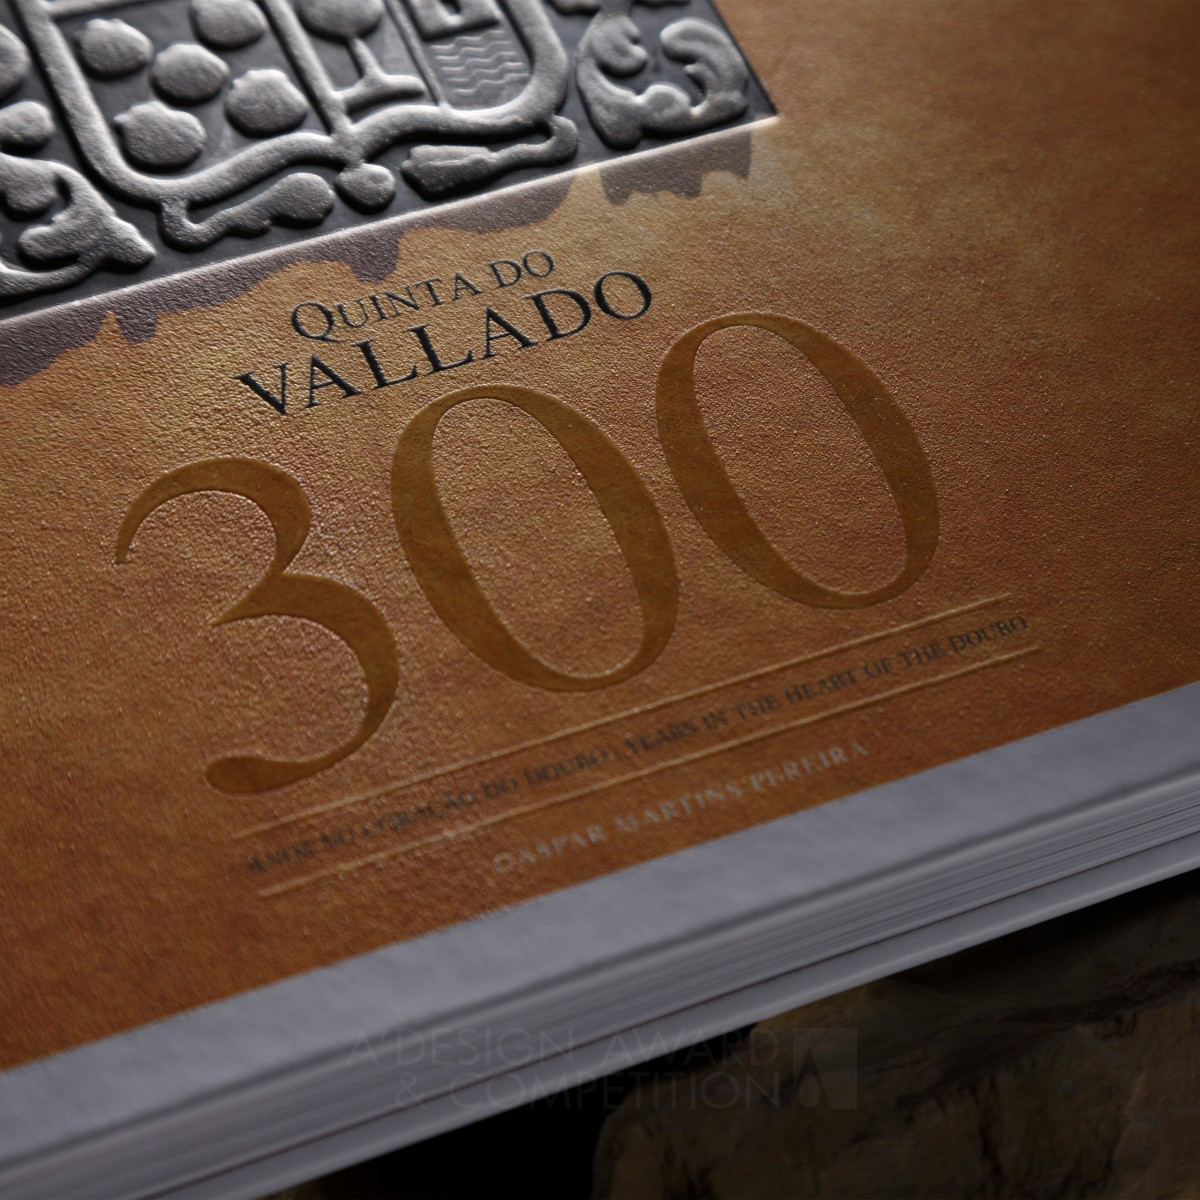 300 Years in the heart of the Douro